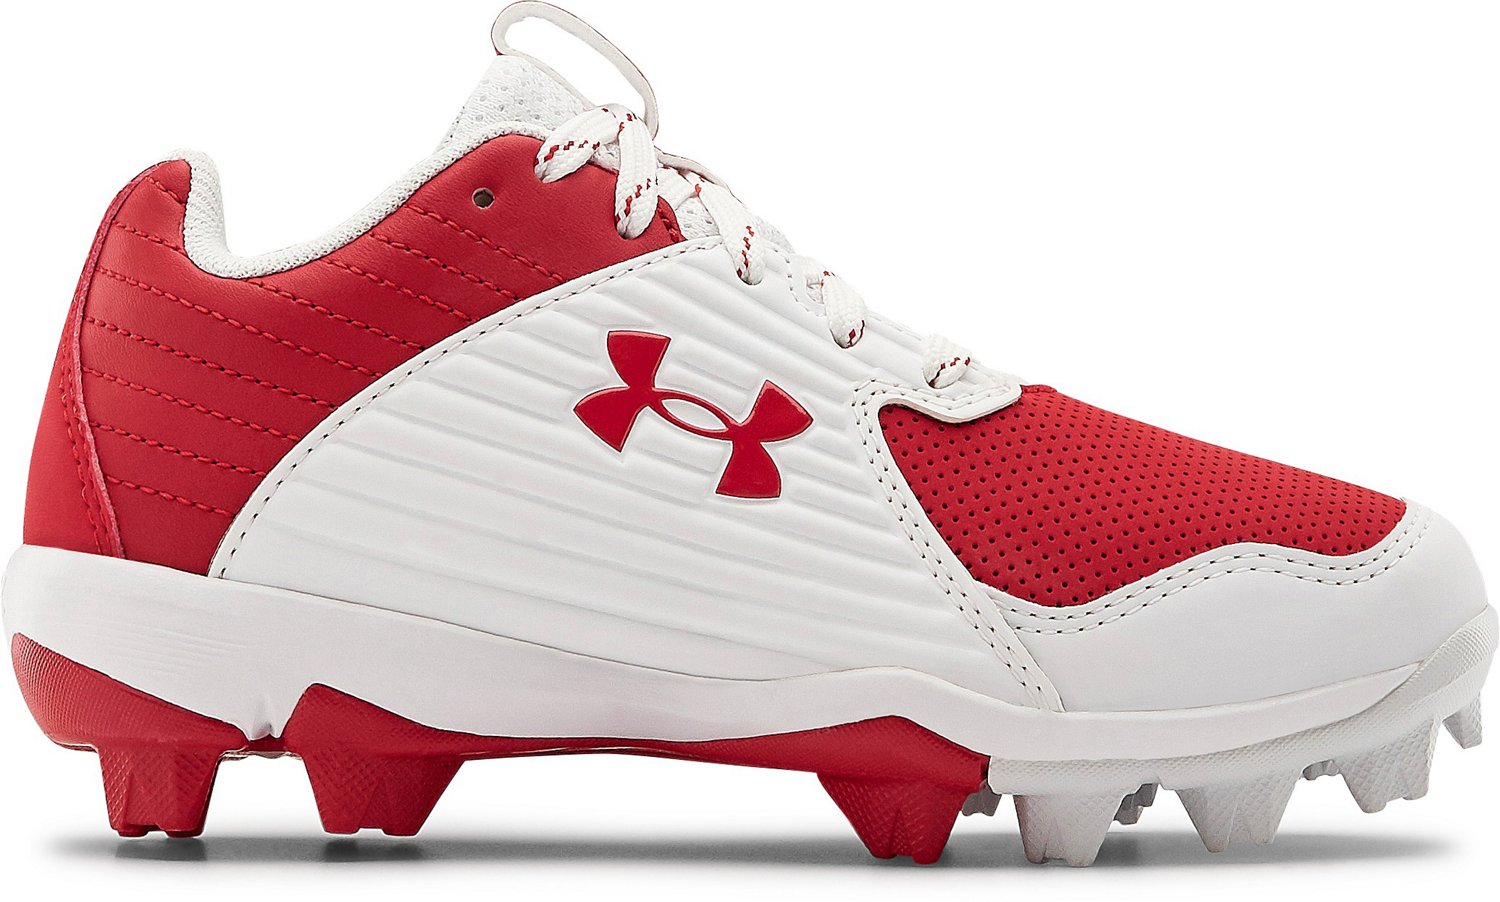 Used Under Armour Leadoff Low Rm Jr 1278754-611 Youth 12.0